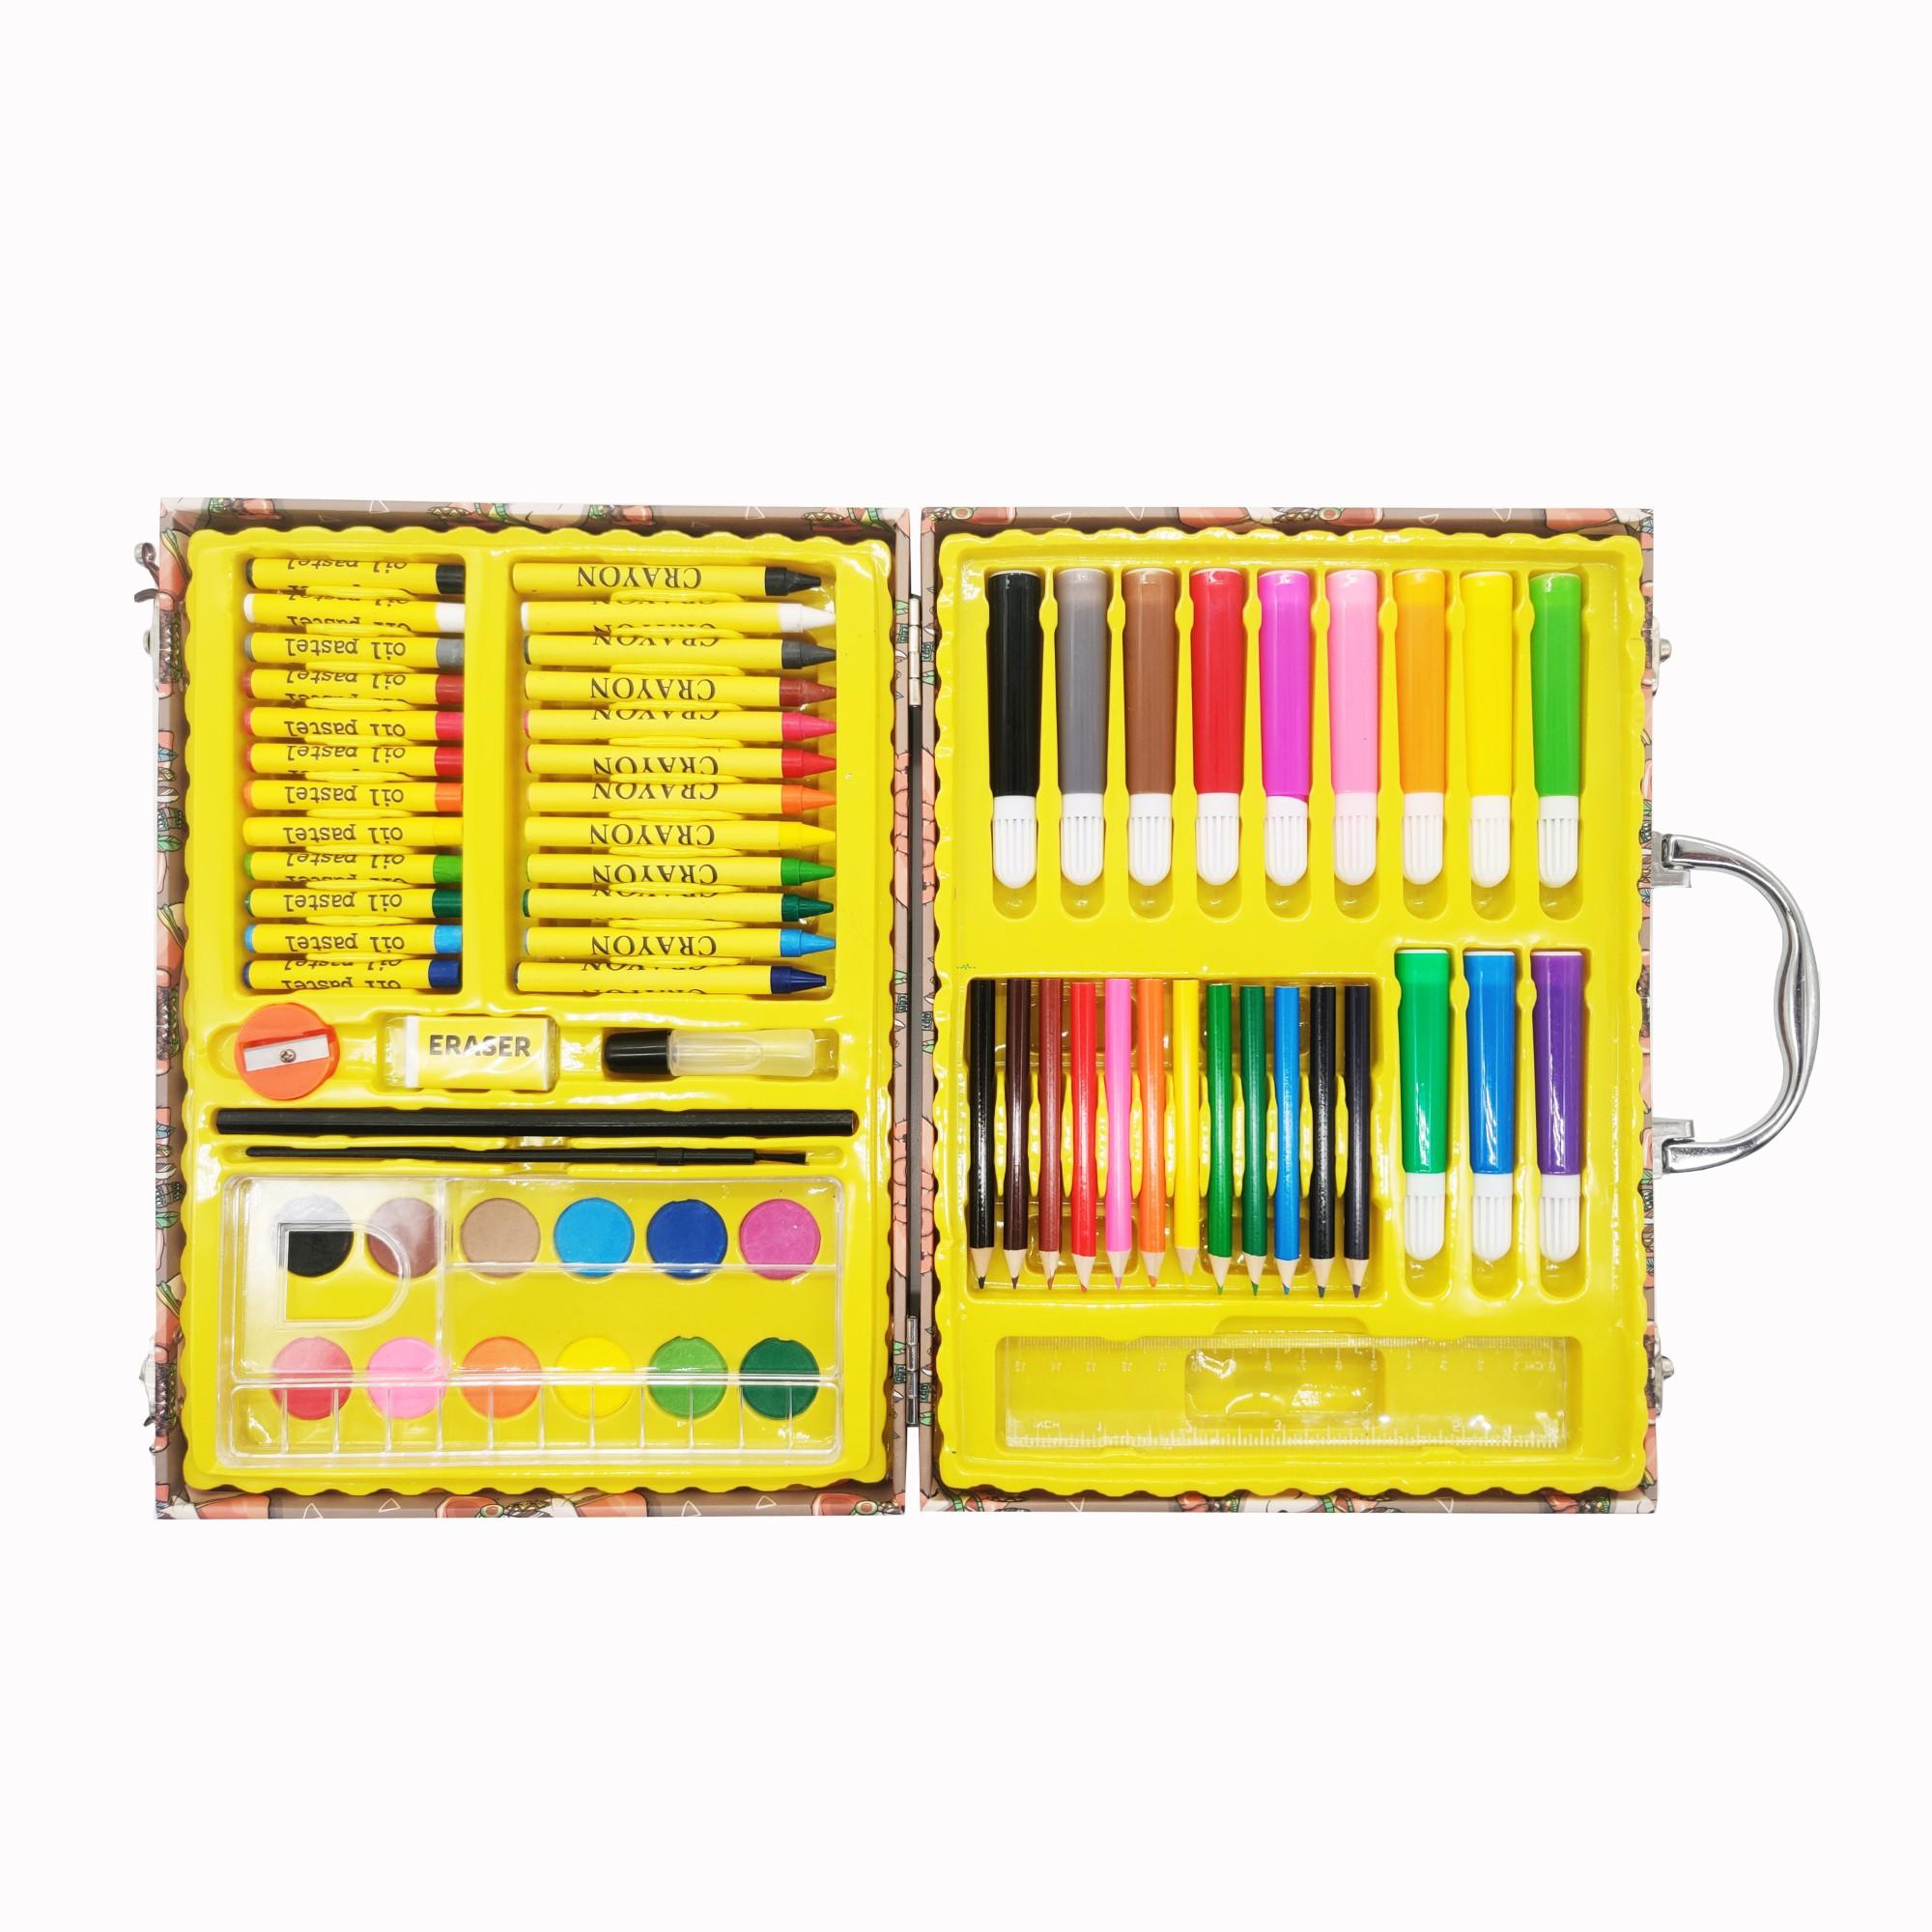 68 Pieces Children's Drawing Set Colorful Pencil Oil Painting Art Drawing Art Supplies Set Stationery Kit Gift For Kids